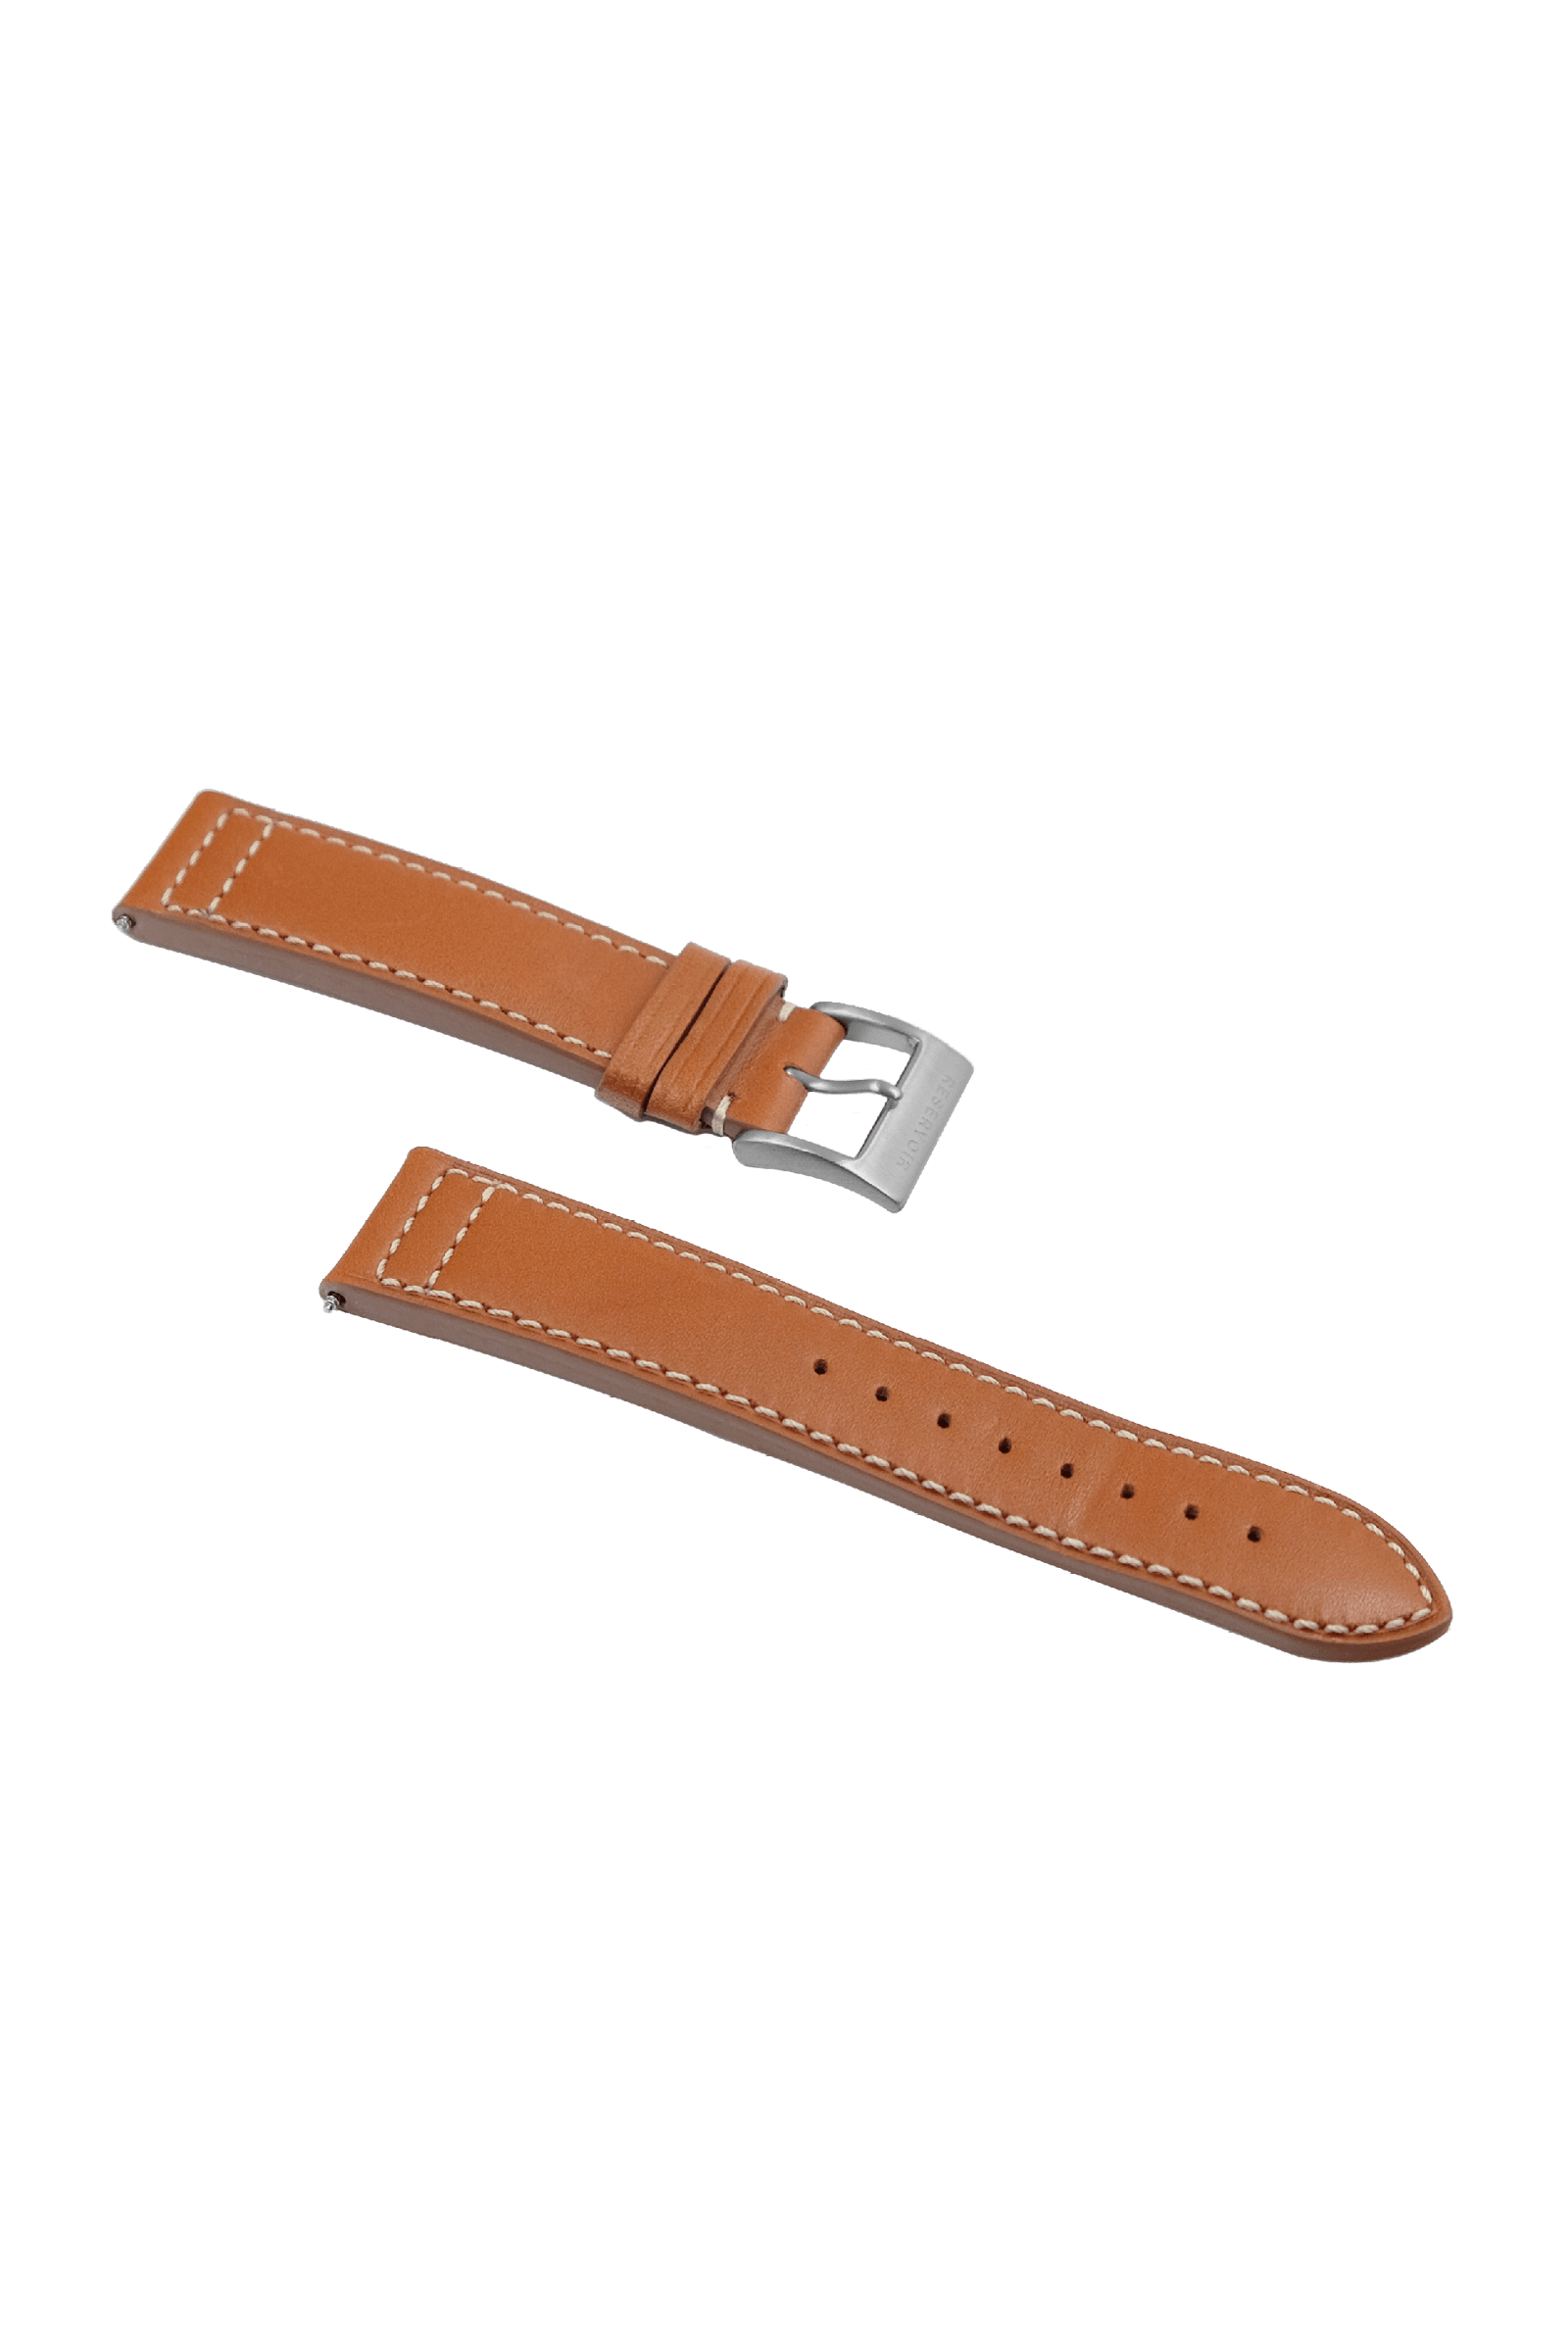 Jet black leather strap WW1 biplane watch with burnt orange and light grey-blue accents.